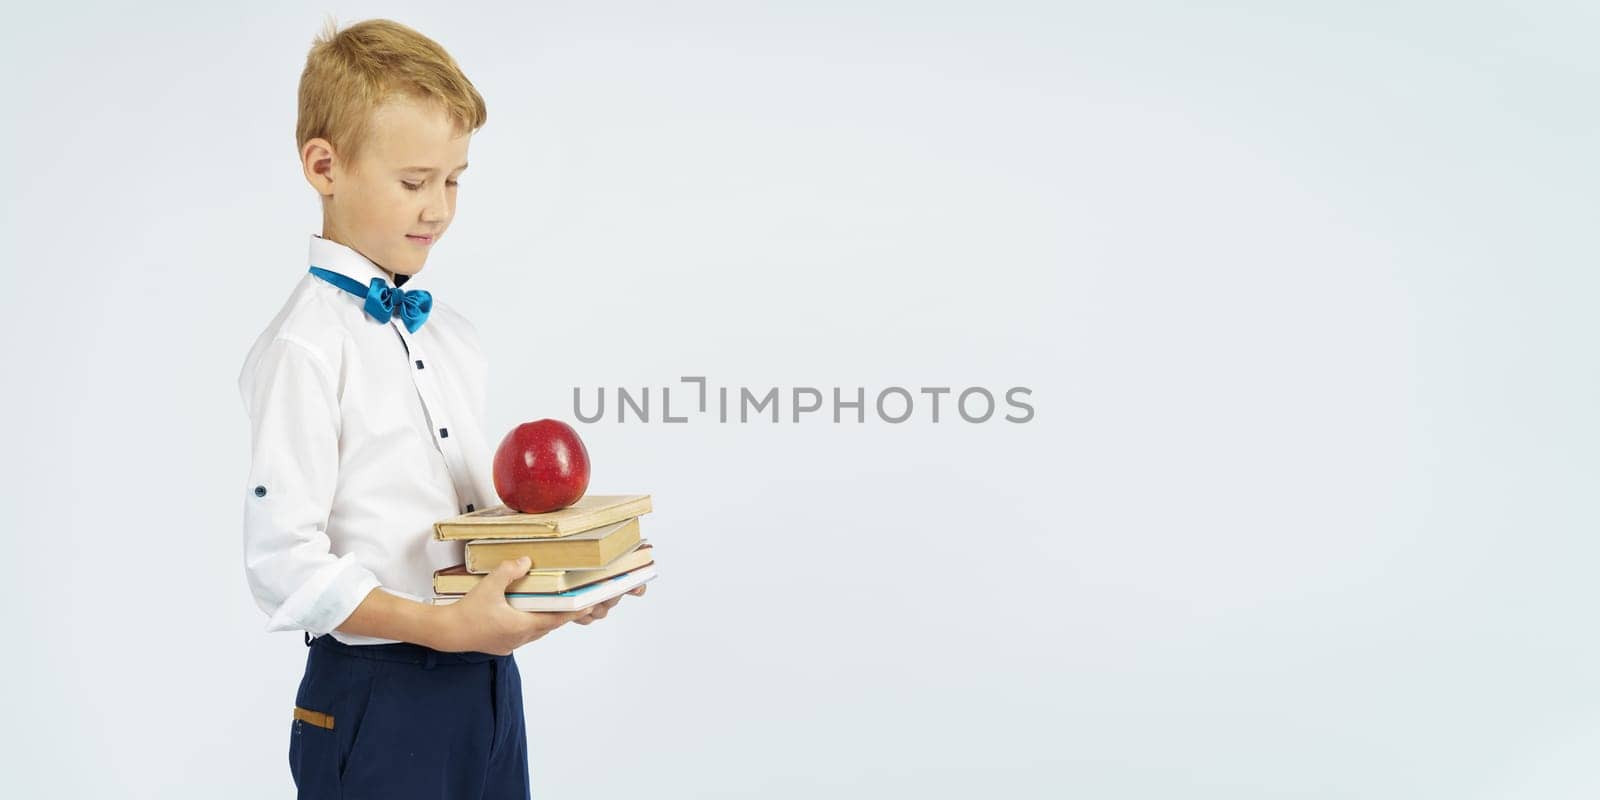 The schoolboy holds books and an apple in his hands. Looks at them. Isolated background. Education concept